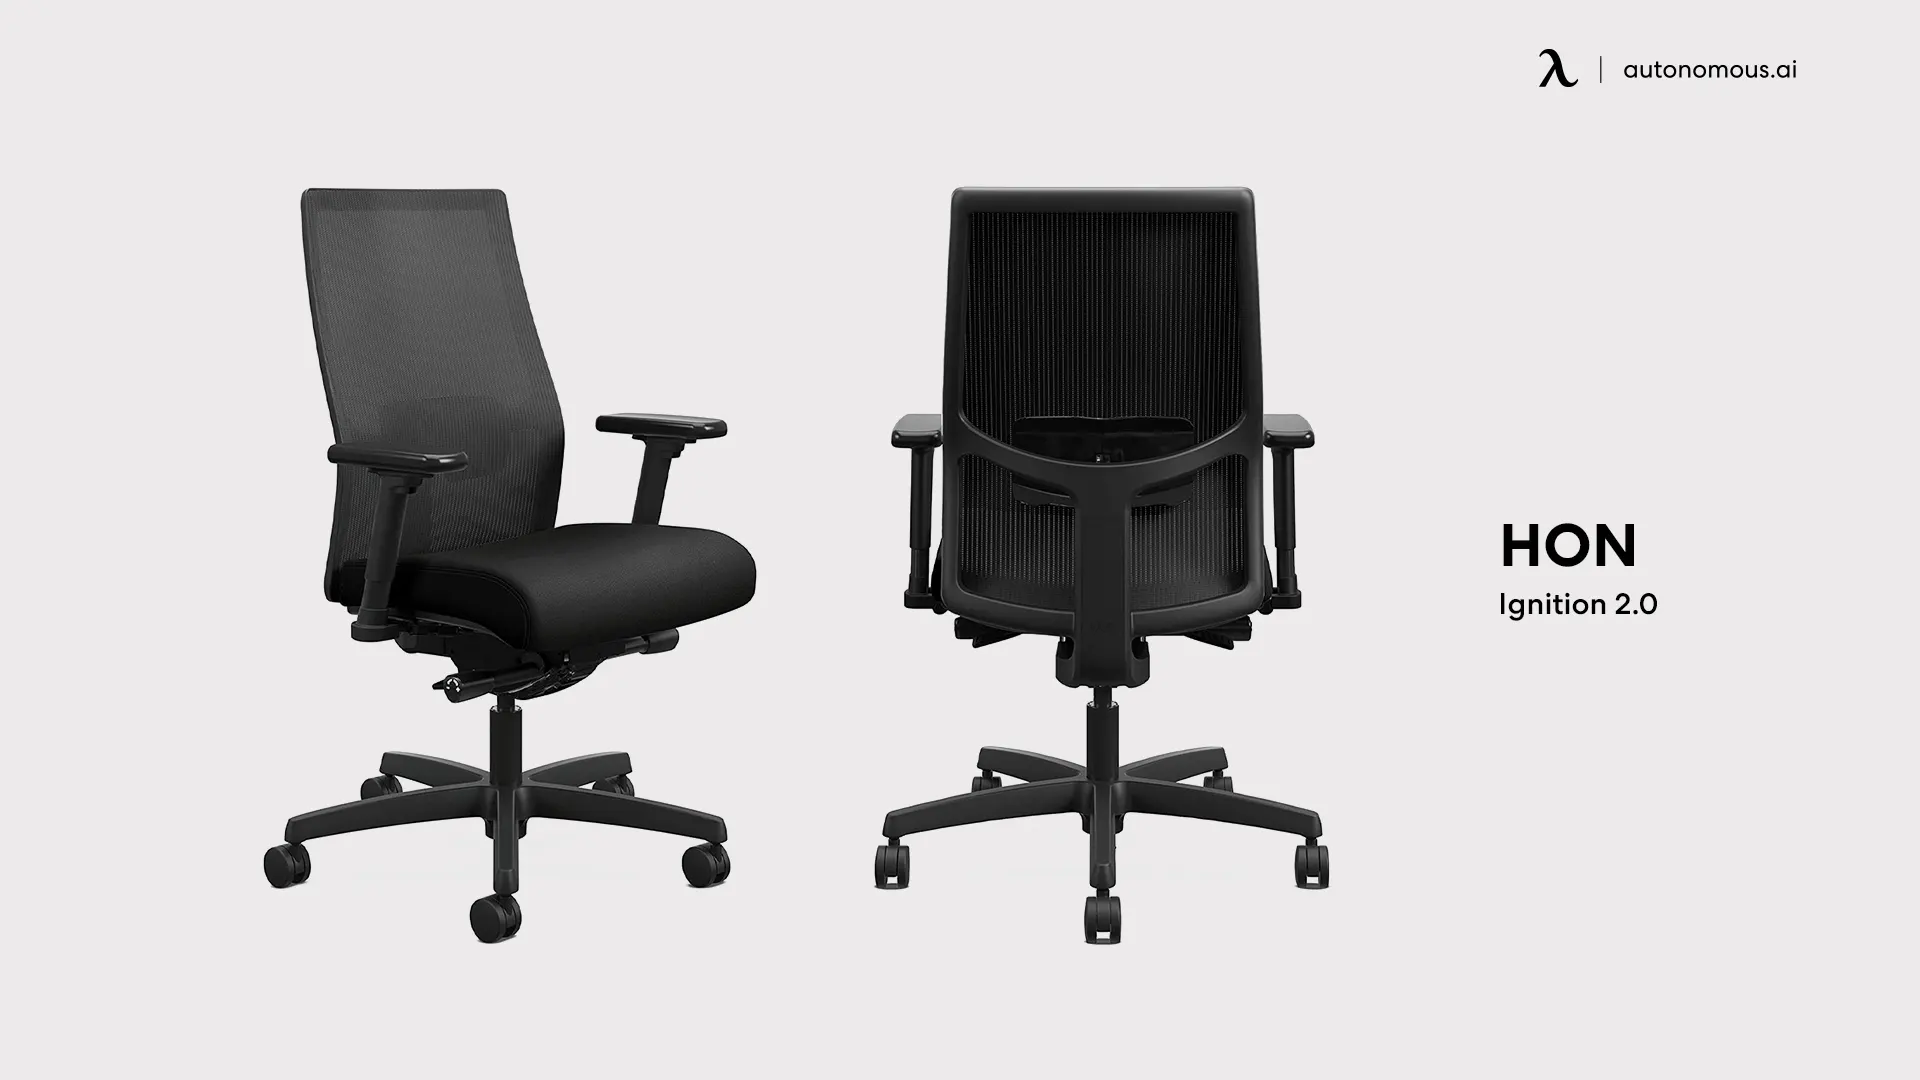 HON Ignition 2.0 executive leather office chair